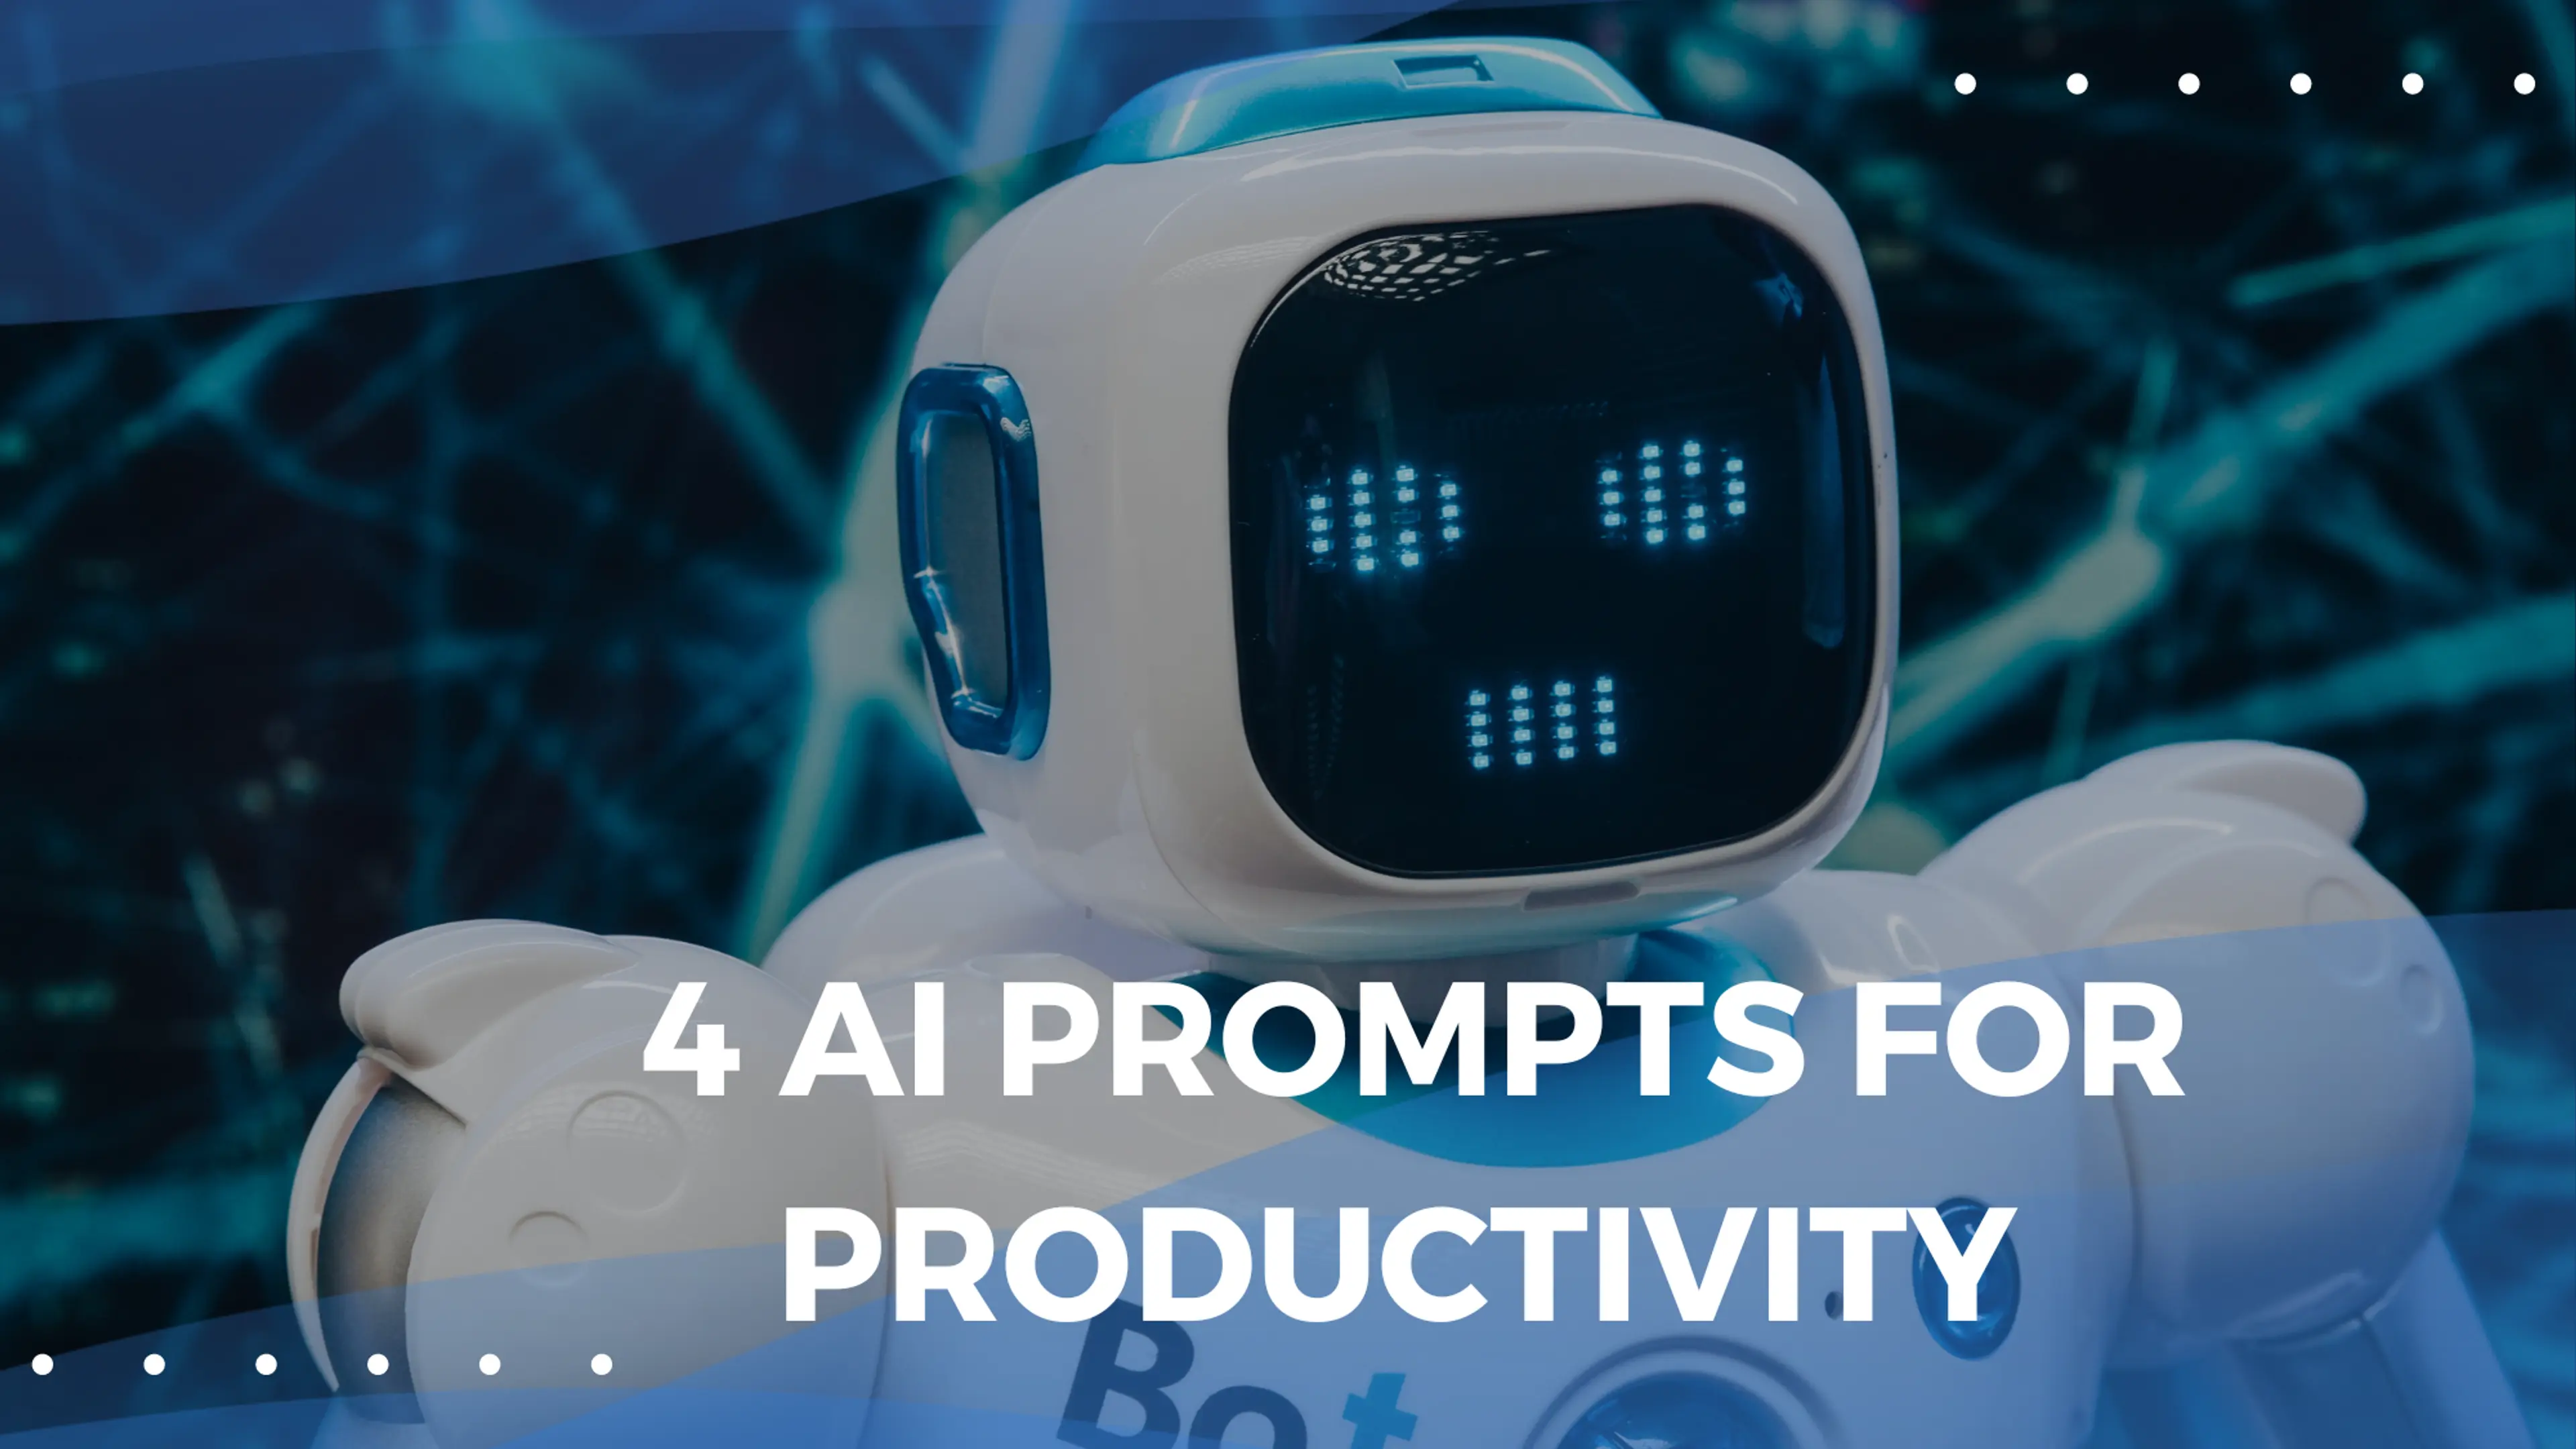 AI for learning: Prompts to improve productivity skills